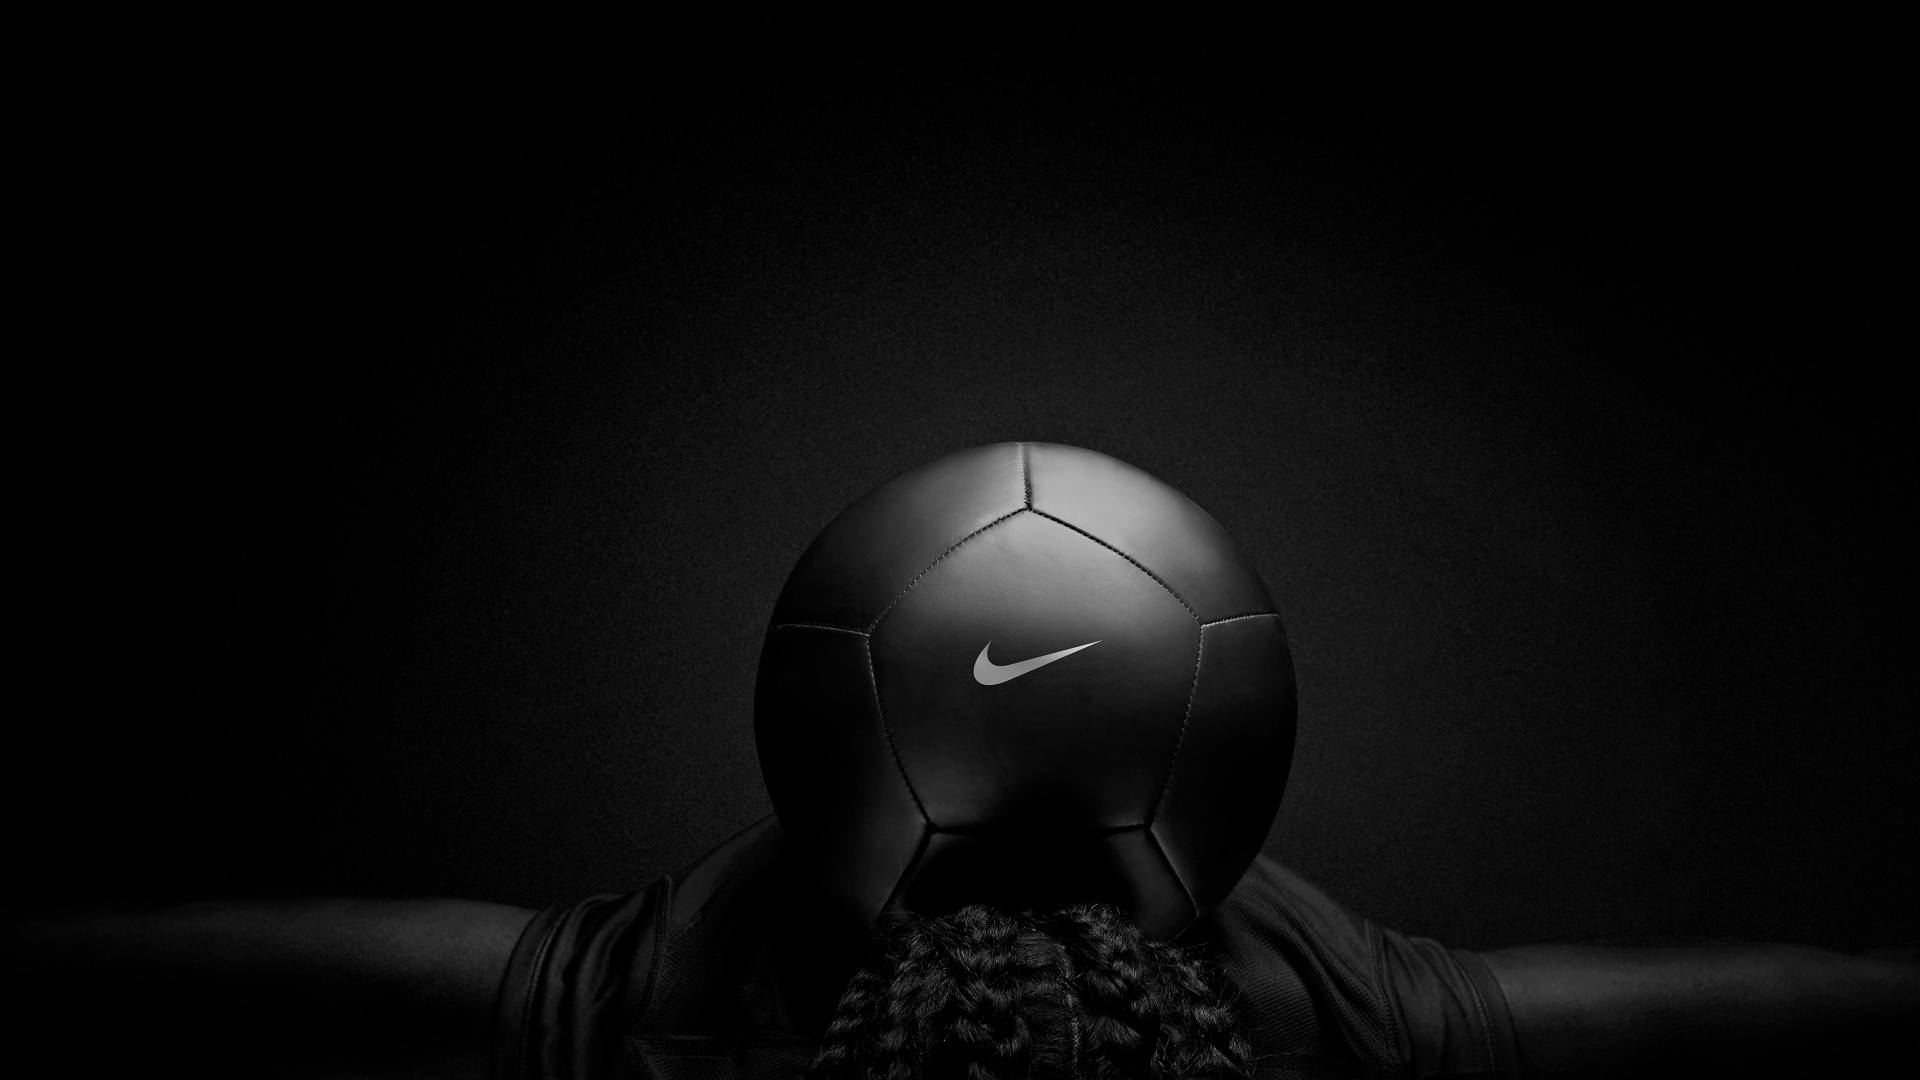 Grayscale Photo of Soccer Ball. Wallpaper in 1920x1080 Resolution